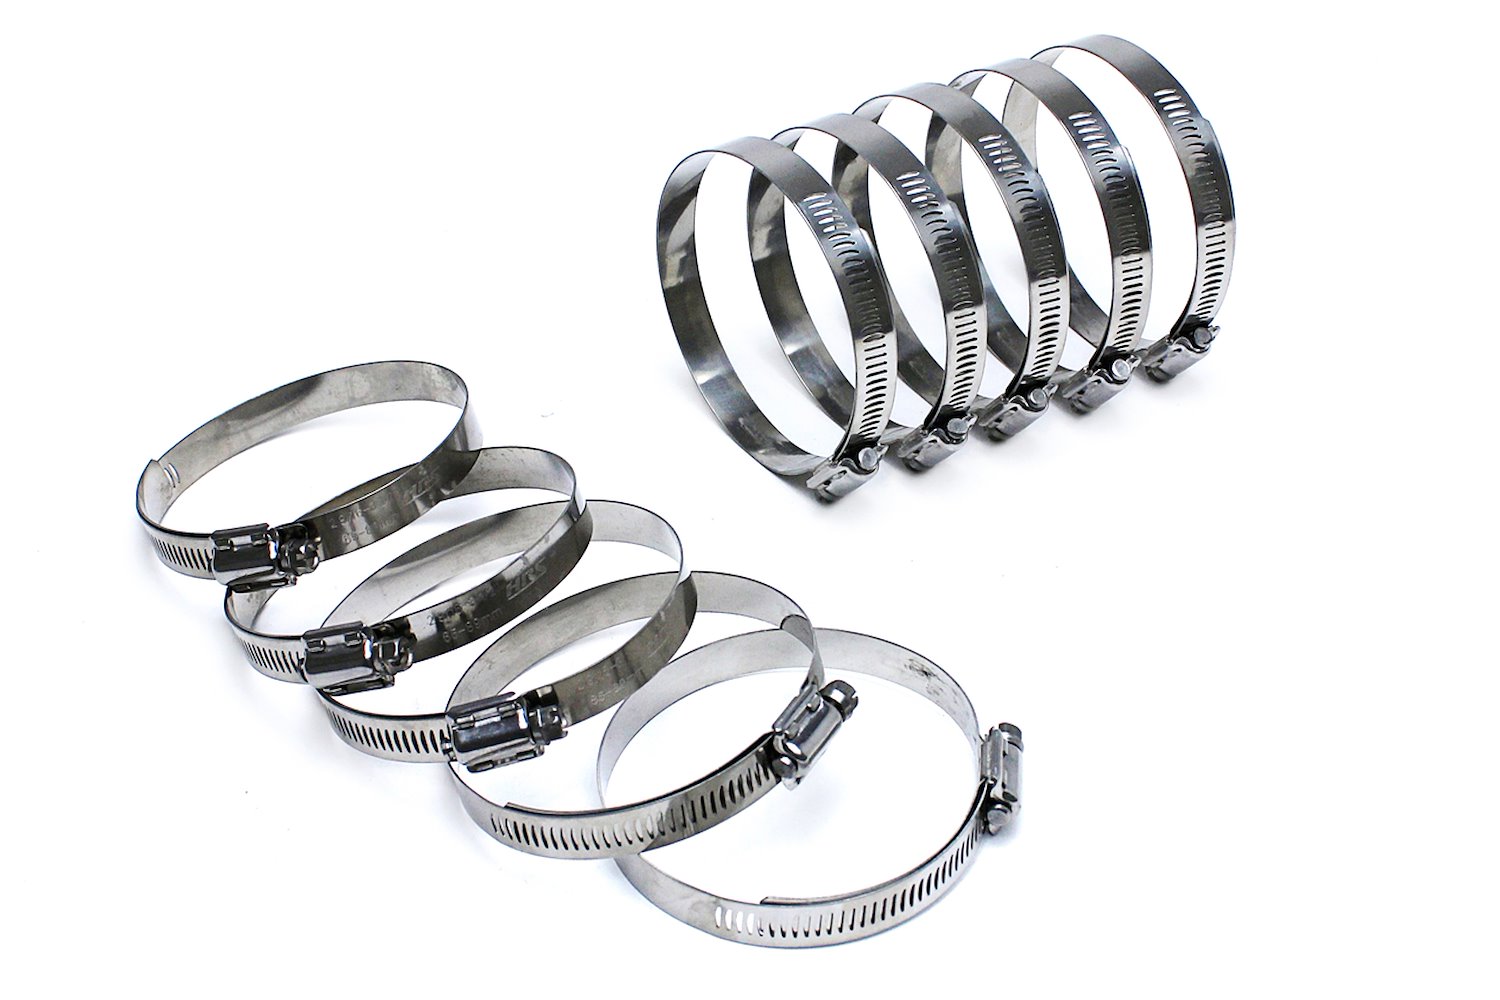 SSWC-130-152x10 Stainless Steel Worm Gear Hose Clamp, Effective Range: 5-5/8 in.- 6-1/2 in., 10Pc